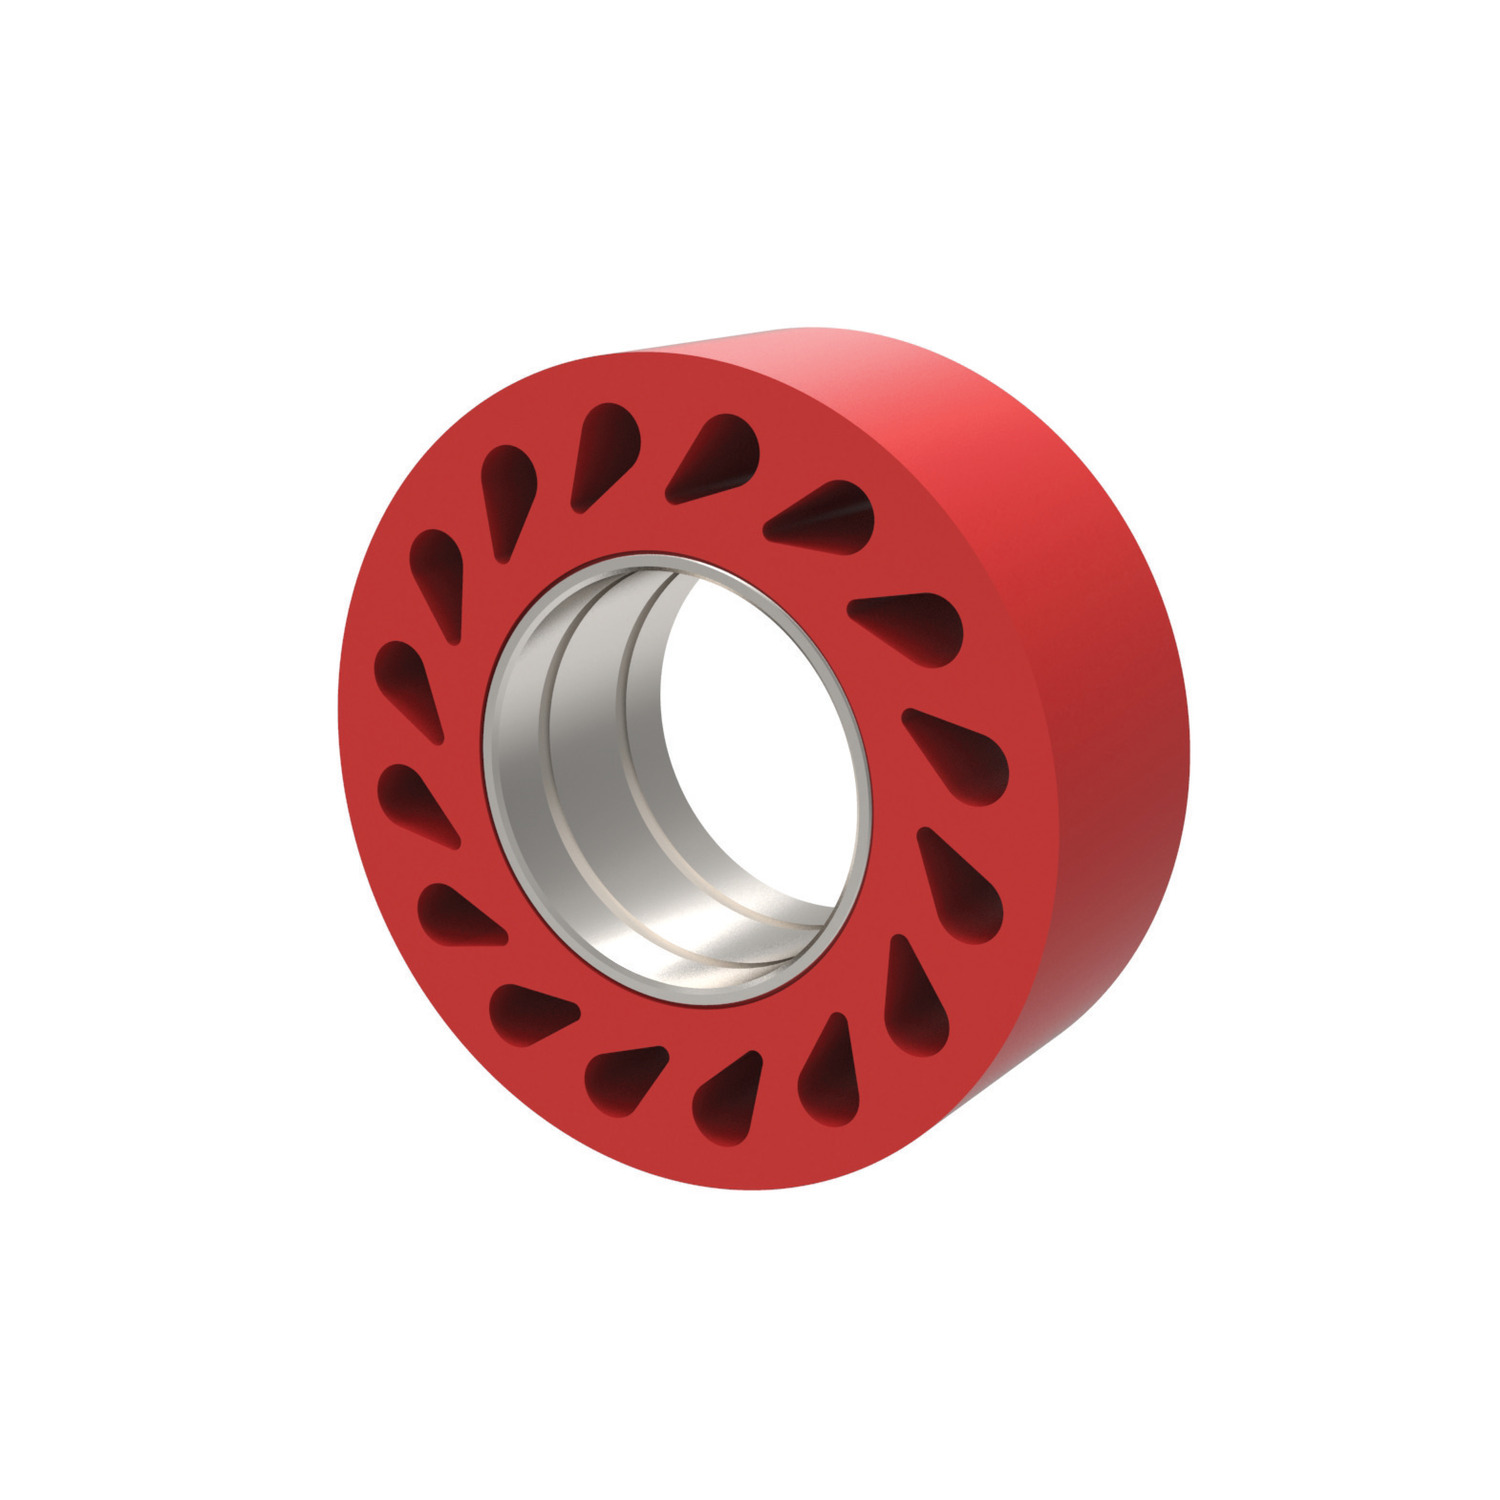 Durasoft Roller Durasoft rollers have "teardrop" holes to allow the roller to flex for firm but non-damaging contact.